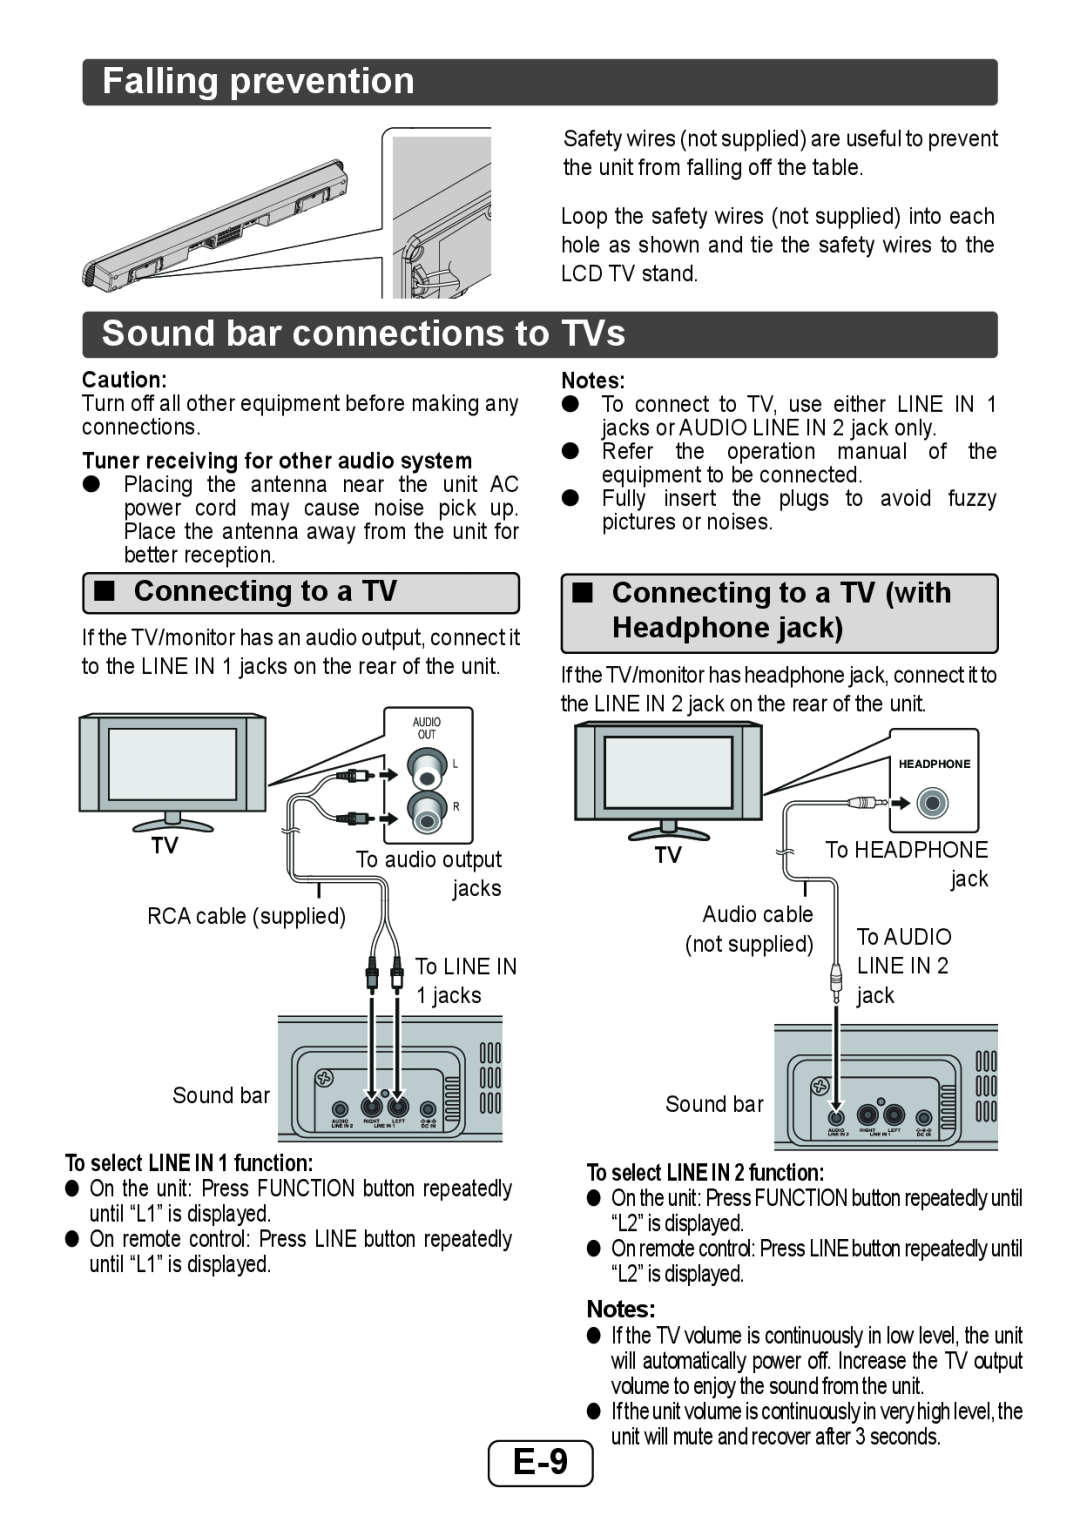 Sharp HTSB250 operation manual Falling prevention, Sound bar connections to TVs, Connecting to a TV with Headphone jack 